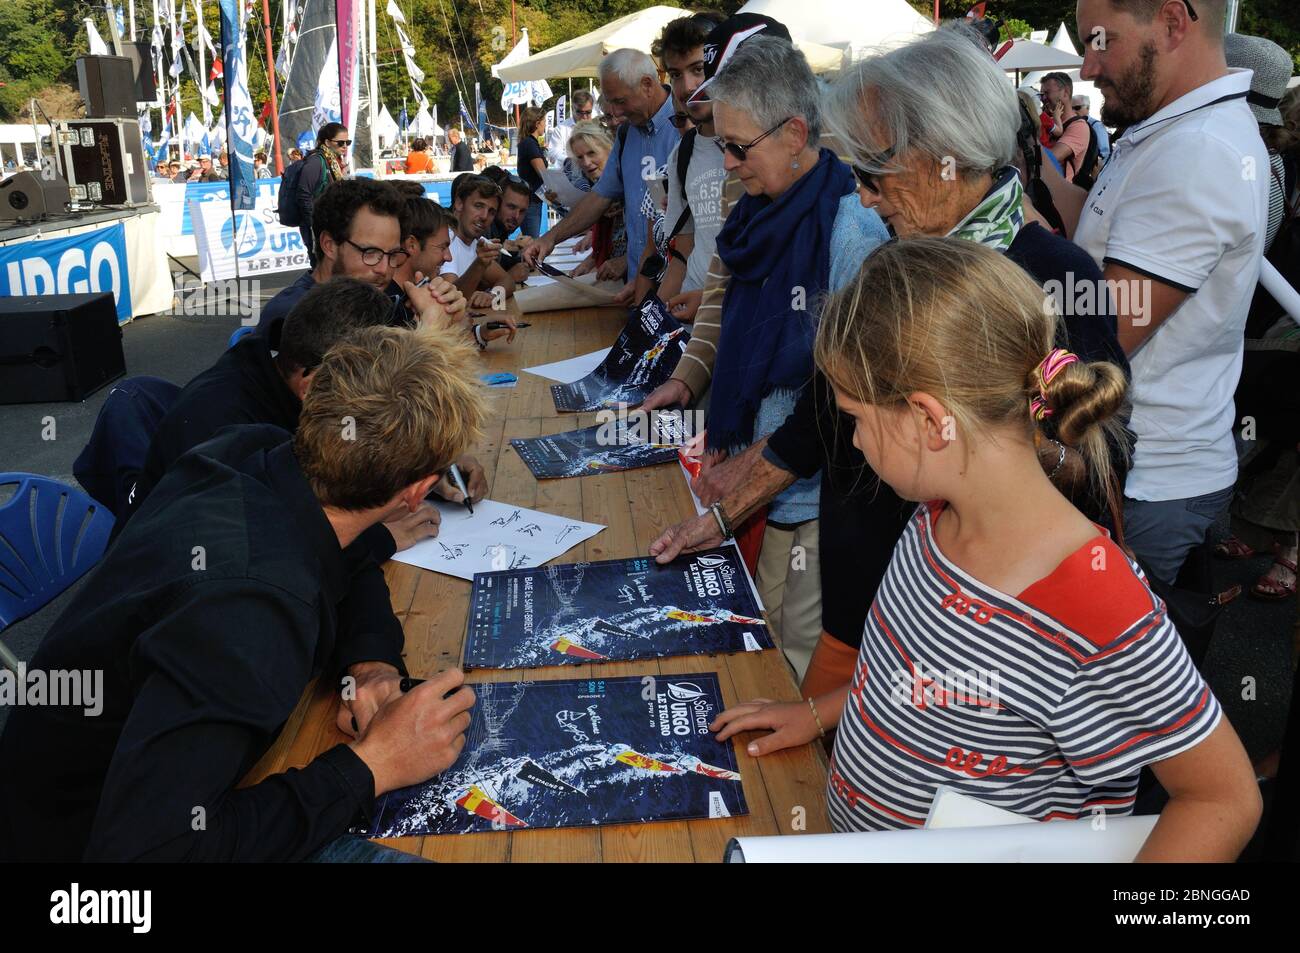 Signing session at the Solitaire du Figaro Stock Photo